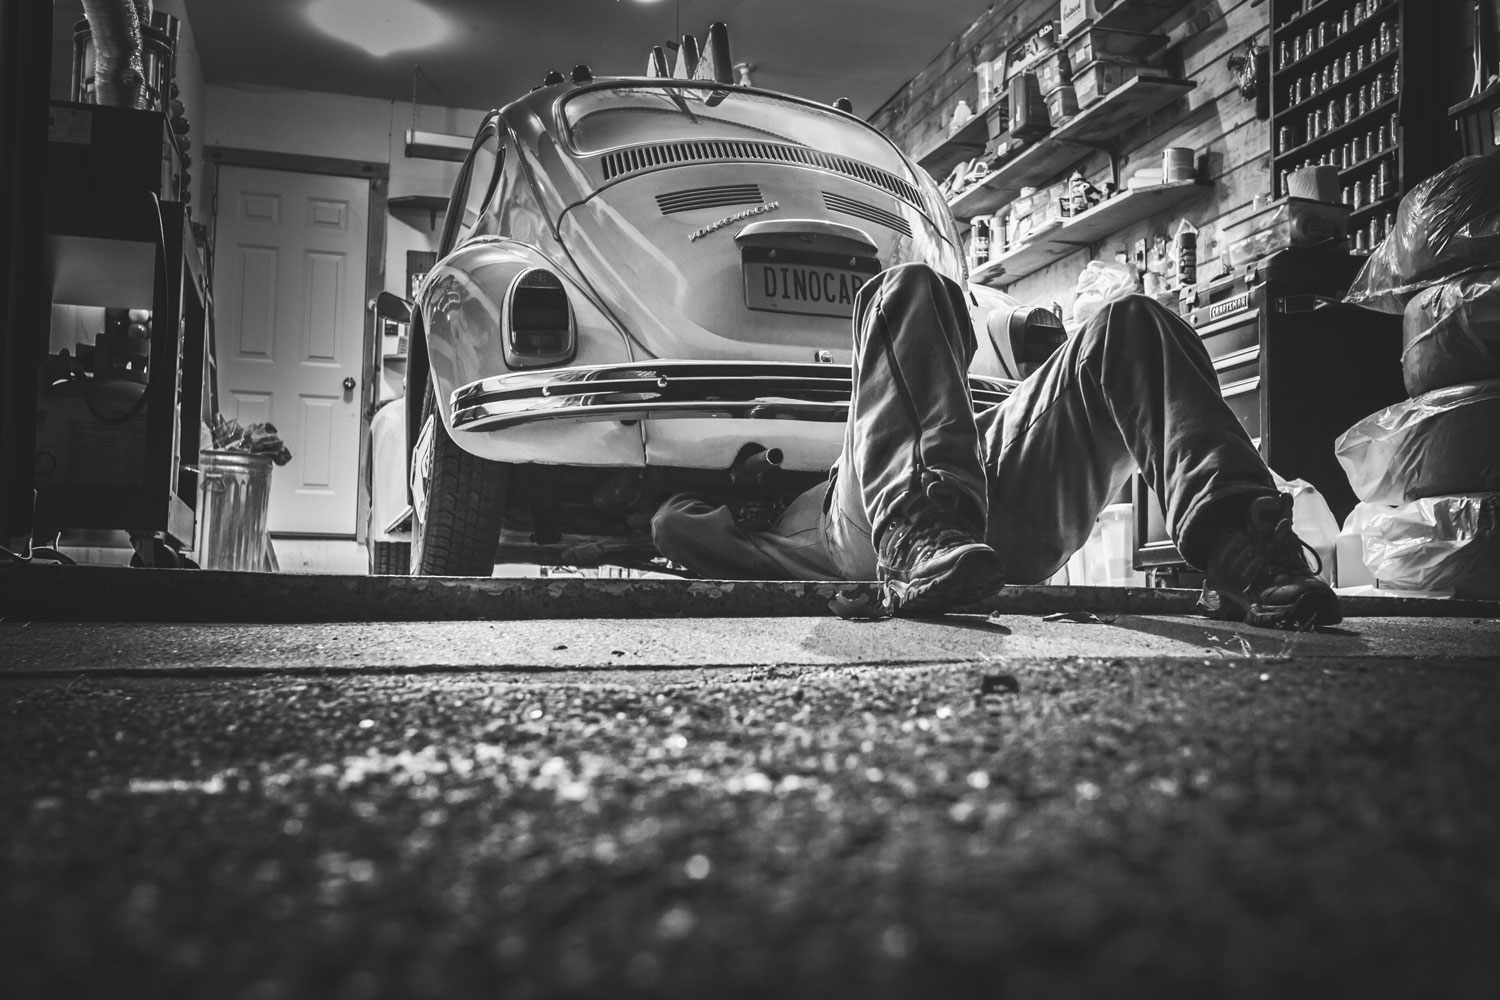 Safety Precautions That Every Auto Mechanic Should Adhere To Picture: Black and white image of mechanic working under a Beetle car in a garage